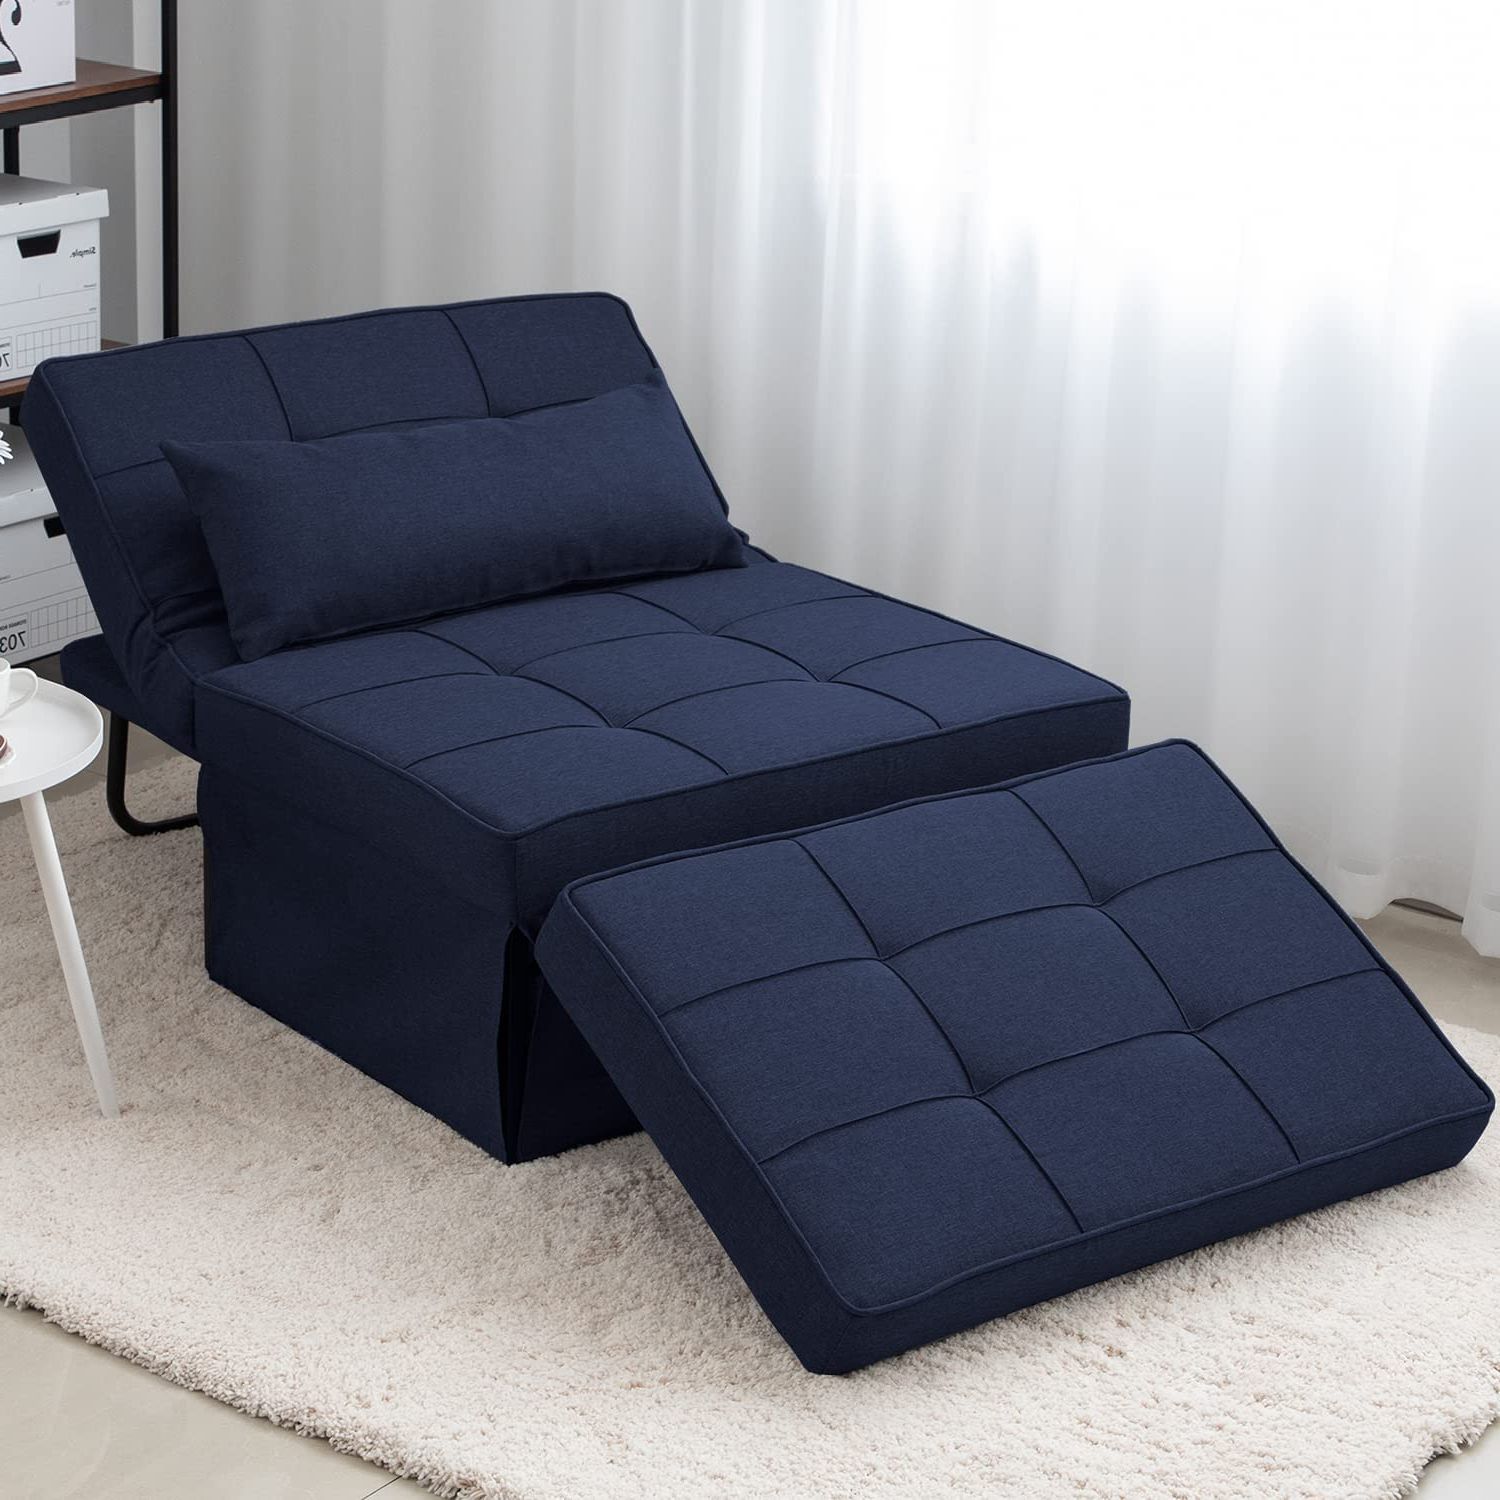 2018 Buy Joyhom Folding Ottoman Sofa Bed, Convertible Chair 4 In 1  Multi Function Modern Breathable Linen Guest Bed With 5 Position Adjustable  Backrest (dark Blue) Online At Lowest Price In Ubuy Kosovo (View 7 of 10)